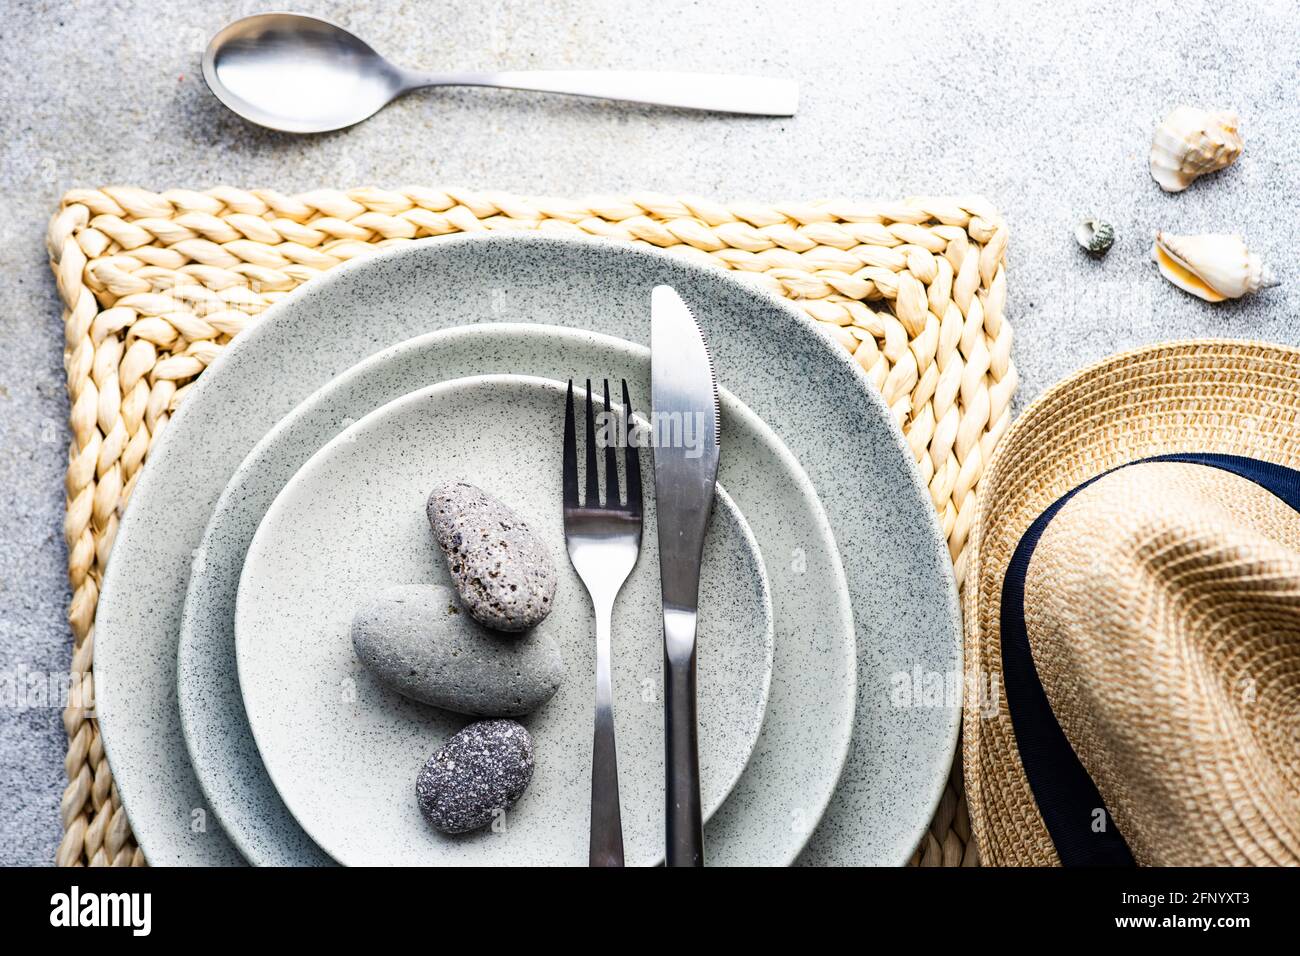 Overhead view of a rustic place setting with pebbles, seashells and a straw hat Stock Photo